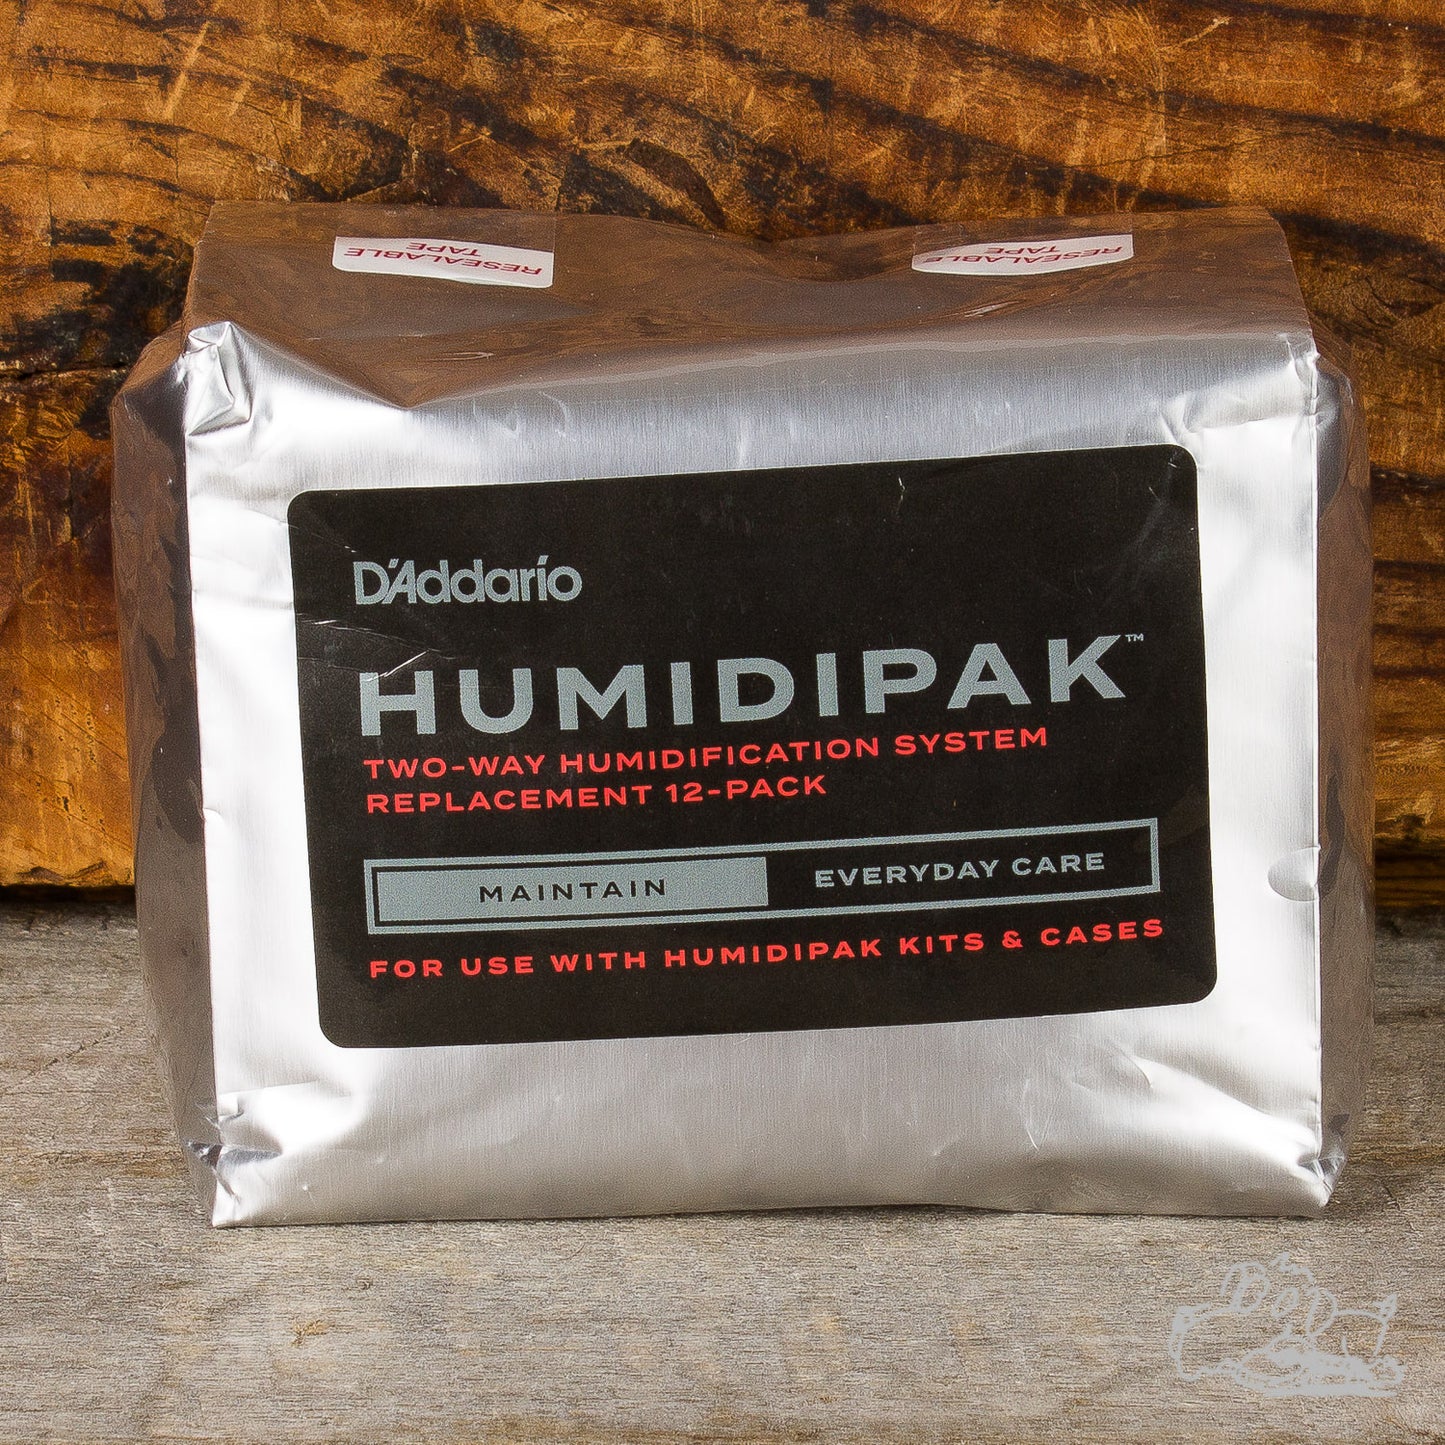 D'Addario Humidipak Two-Way Humidification System Replacement 12-Pack